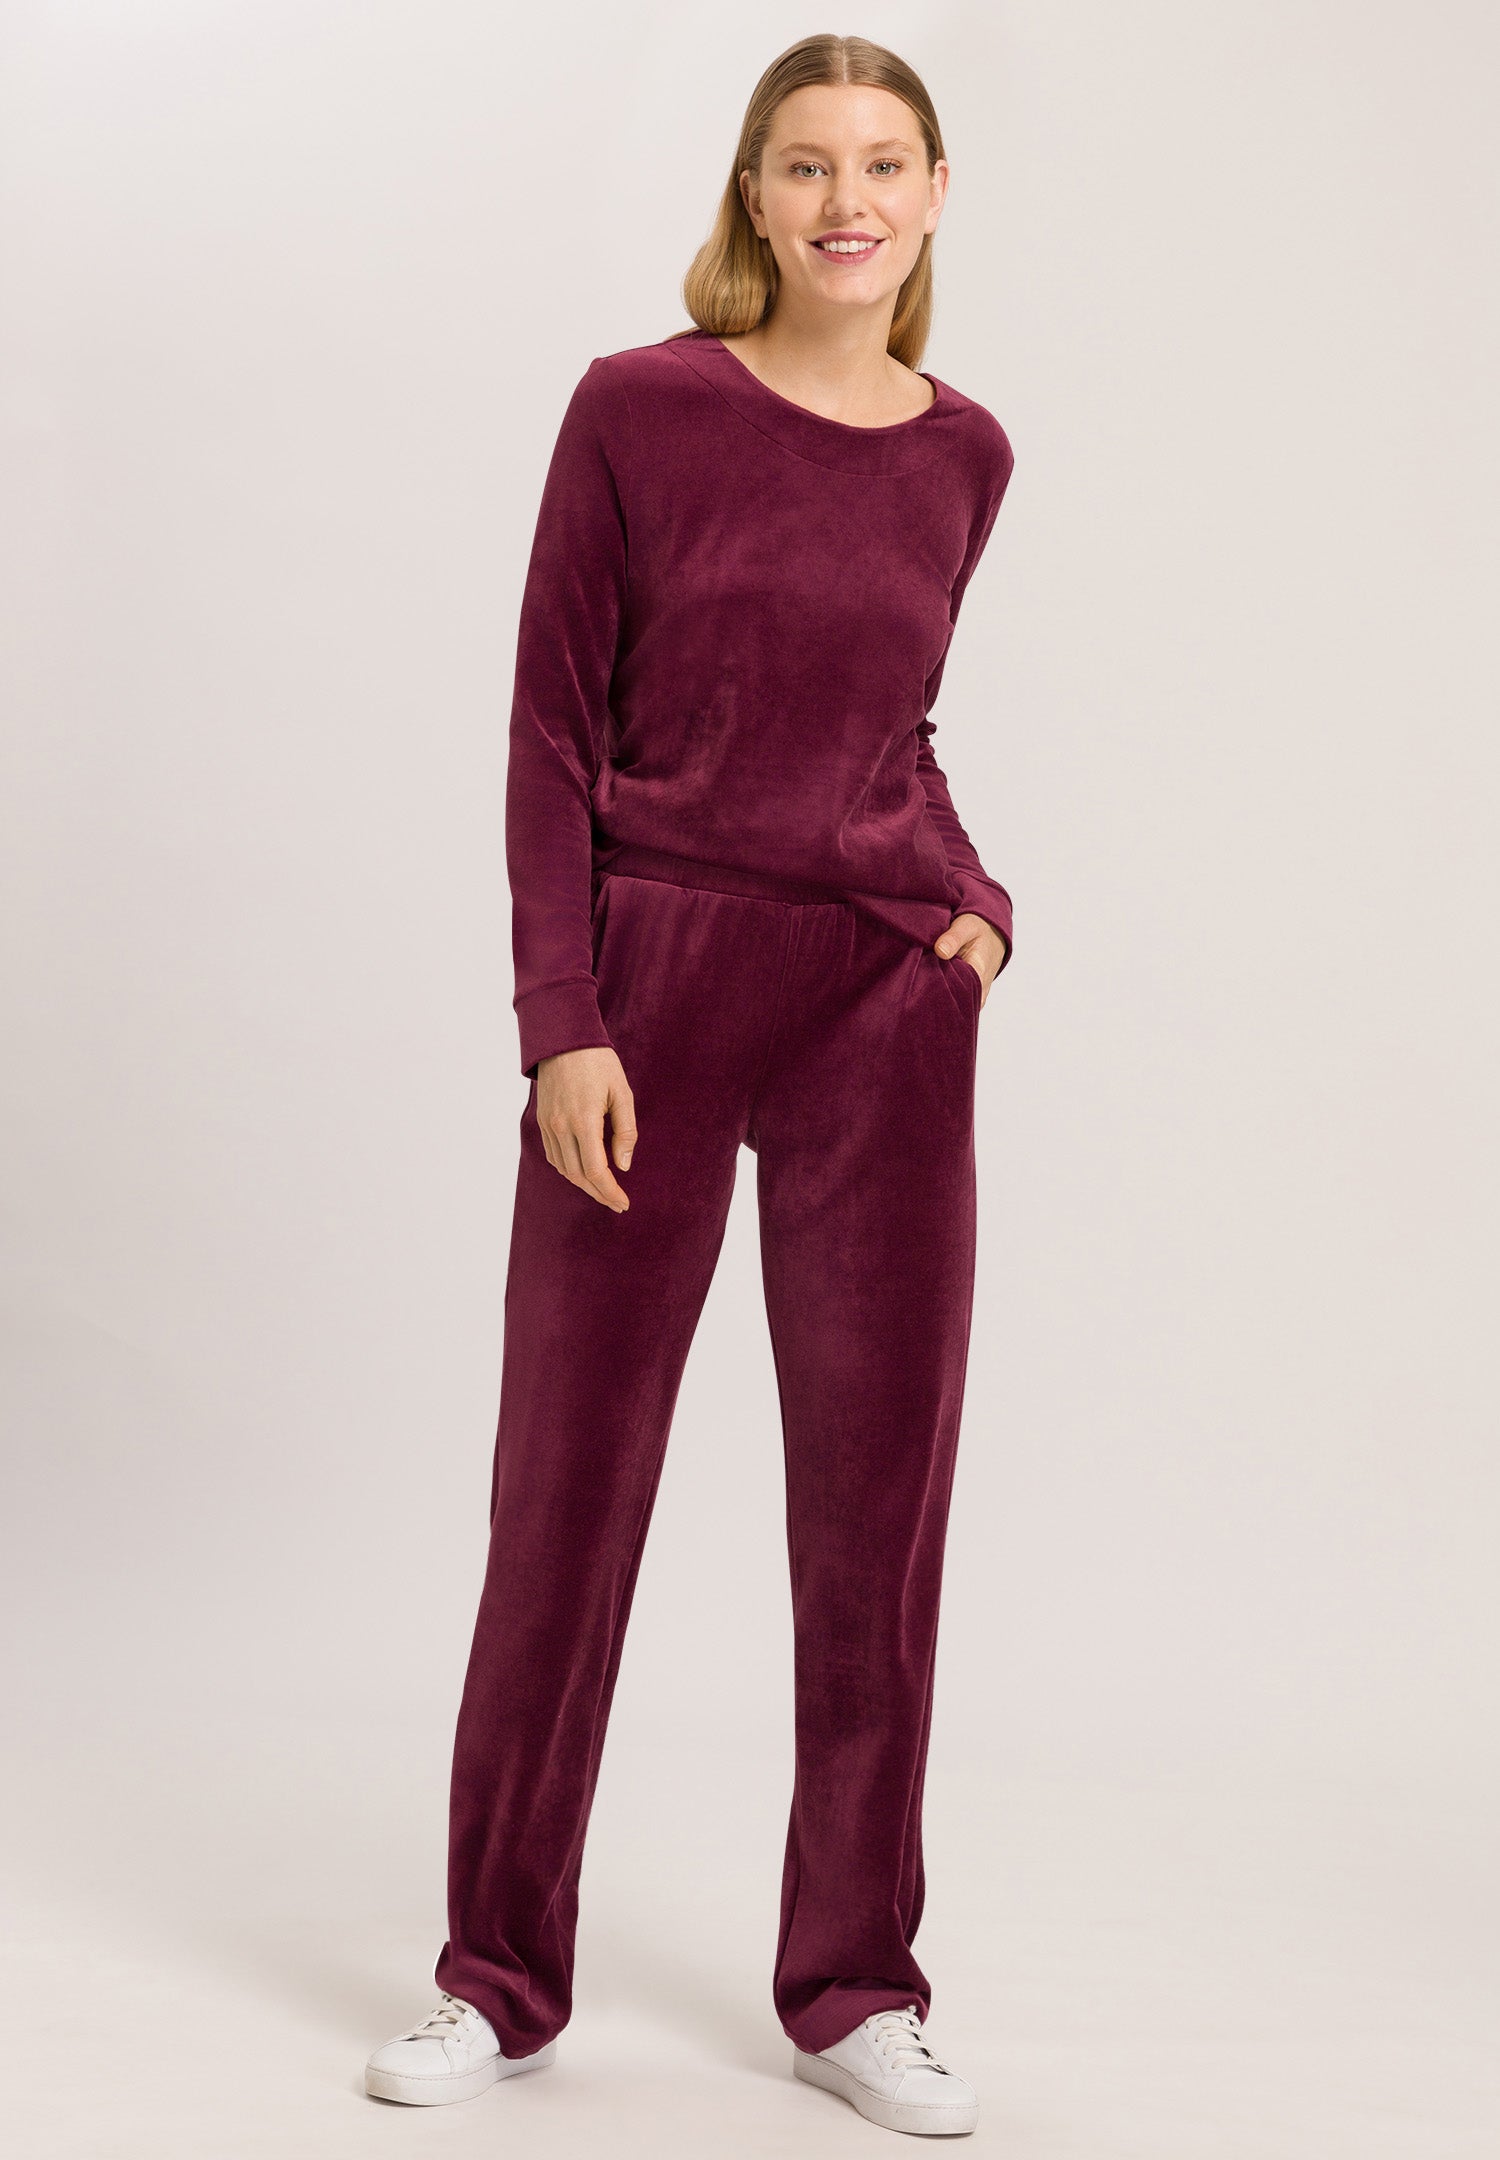 78772 Favourites Pants - 2423 Ruby Wine